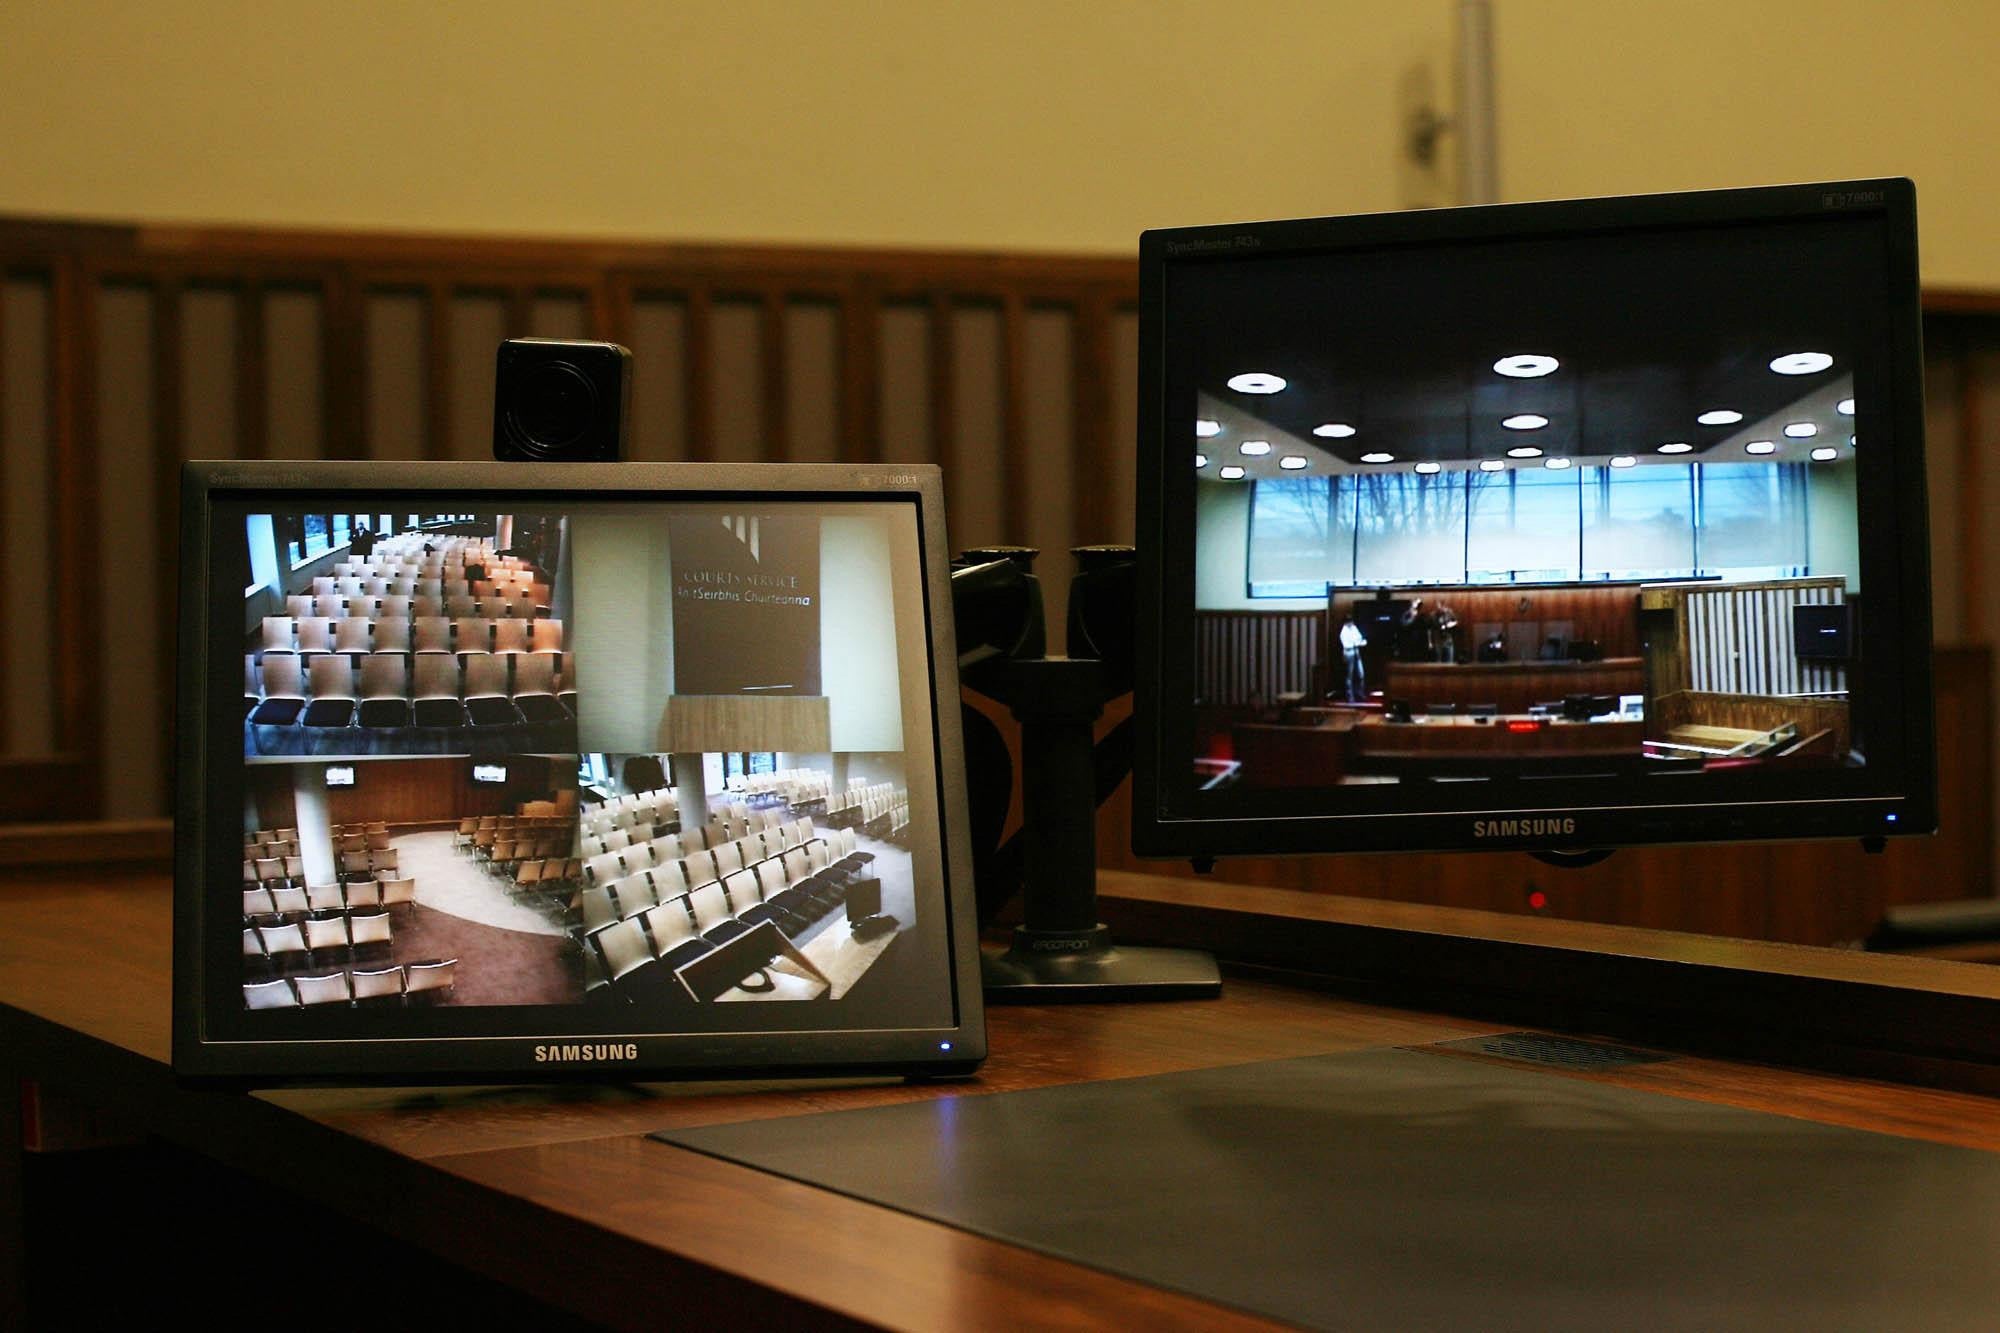 A general view of video equipment being used in courts (Niall Carson/PA)